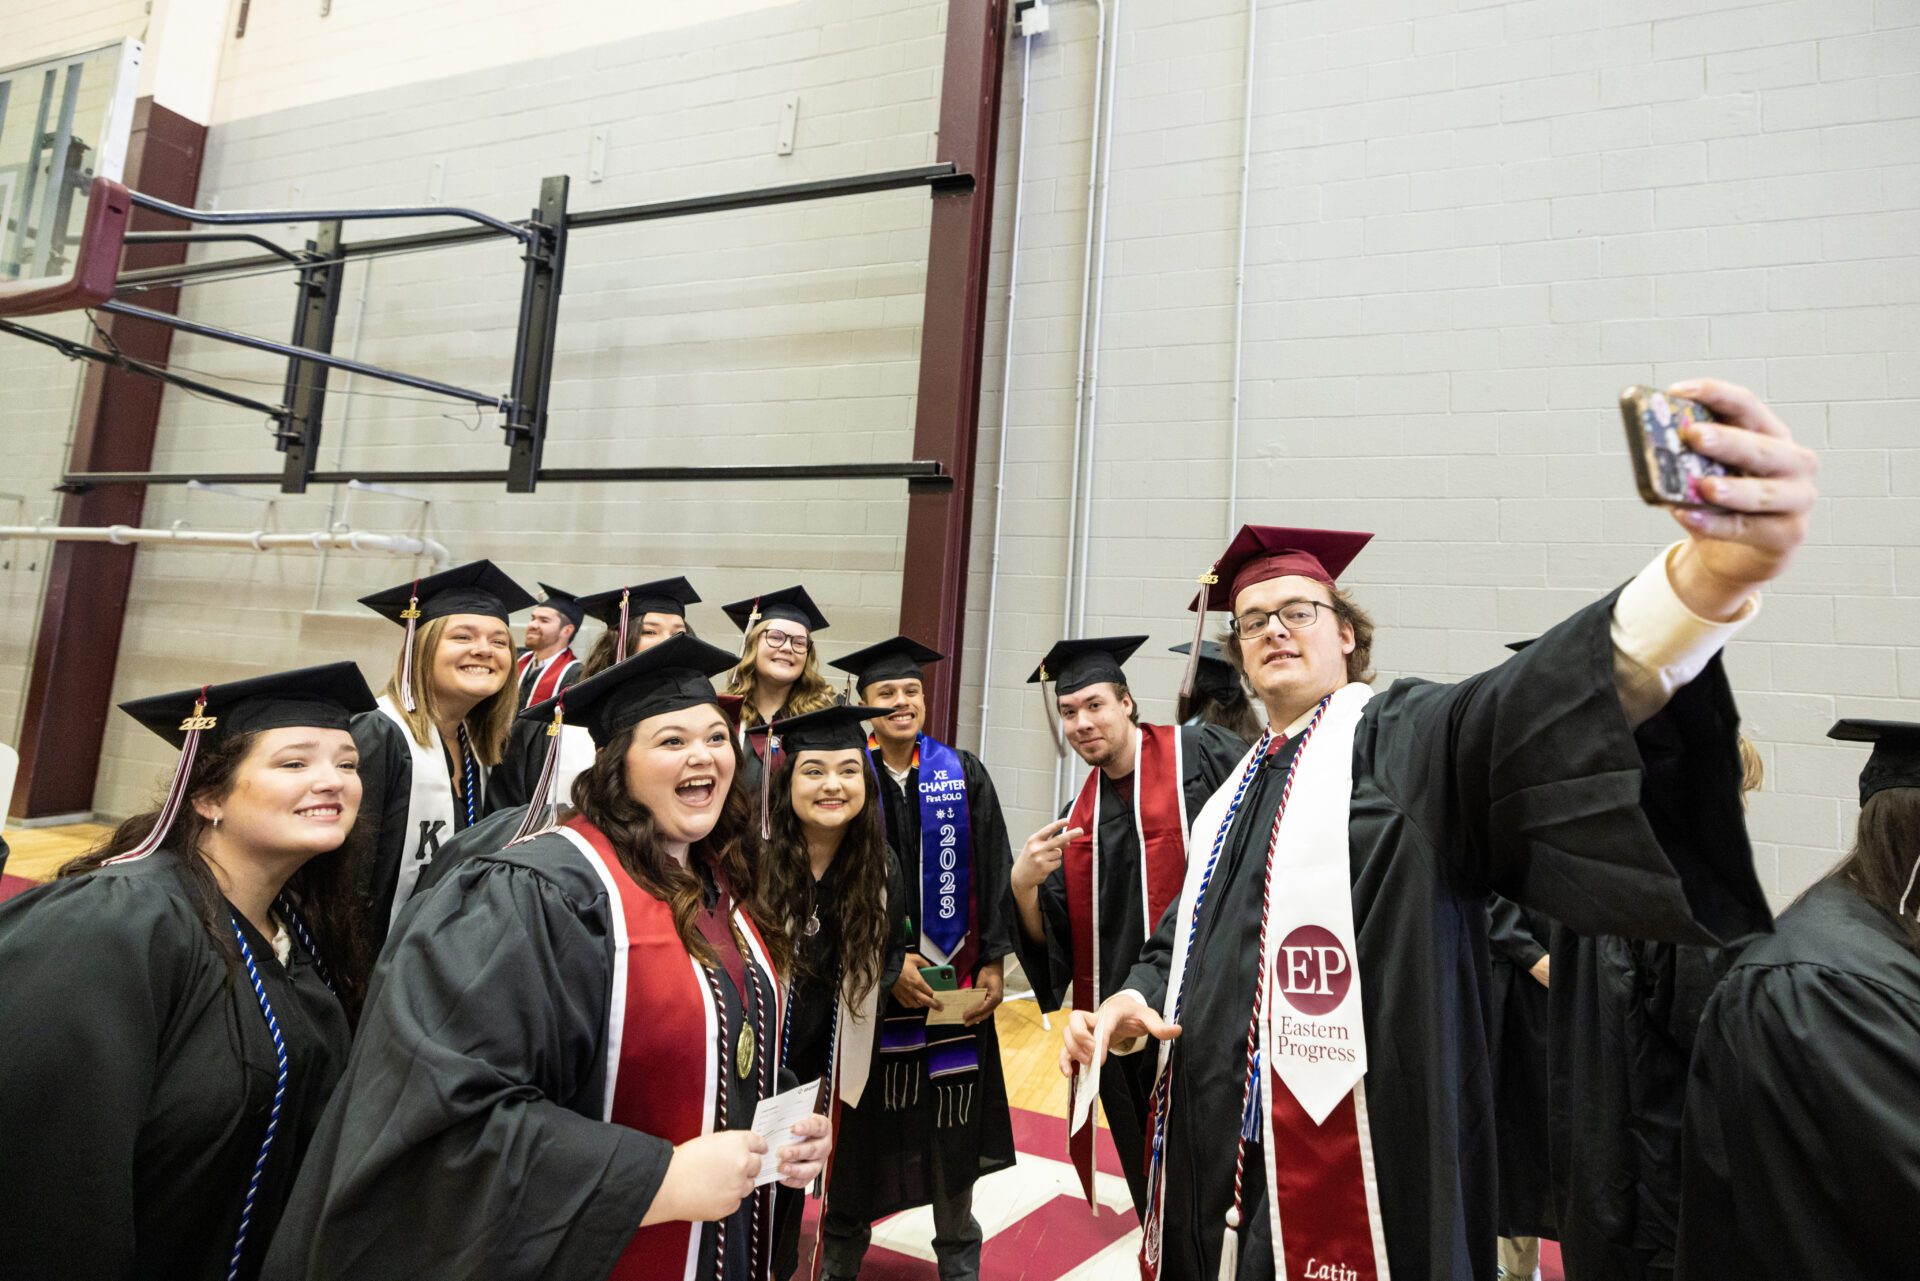 Smiling graduates with diplomas walking down aisle during commencement ceremony